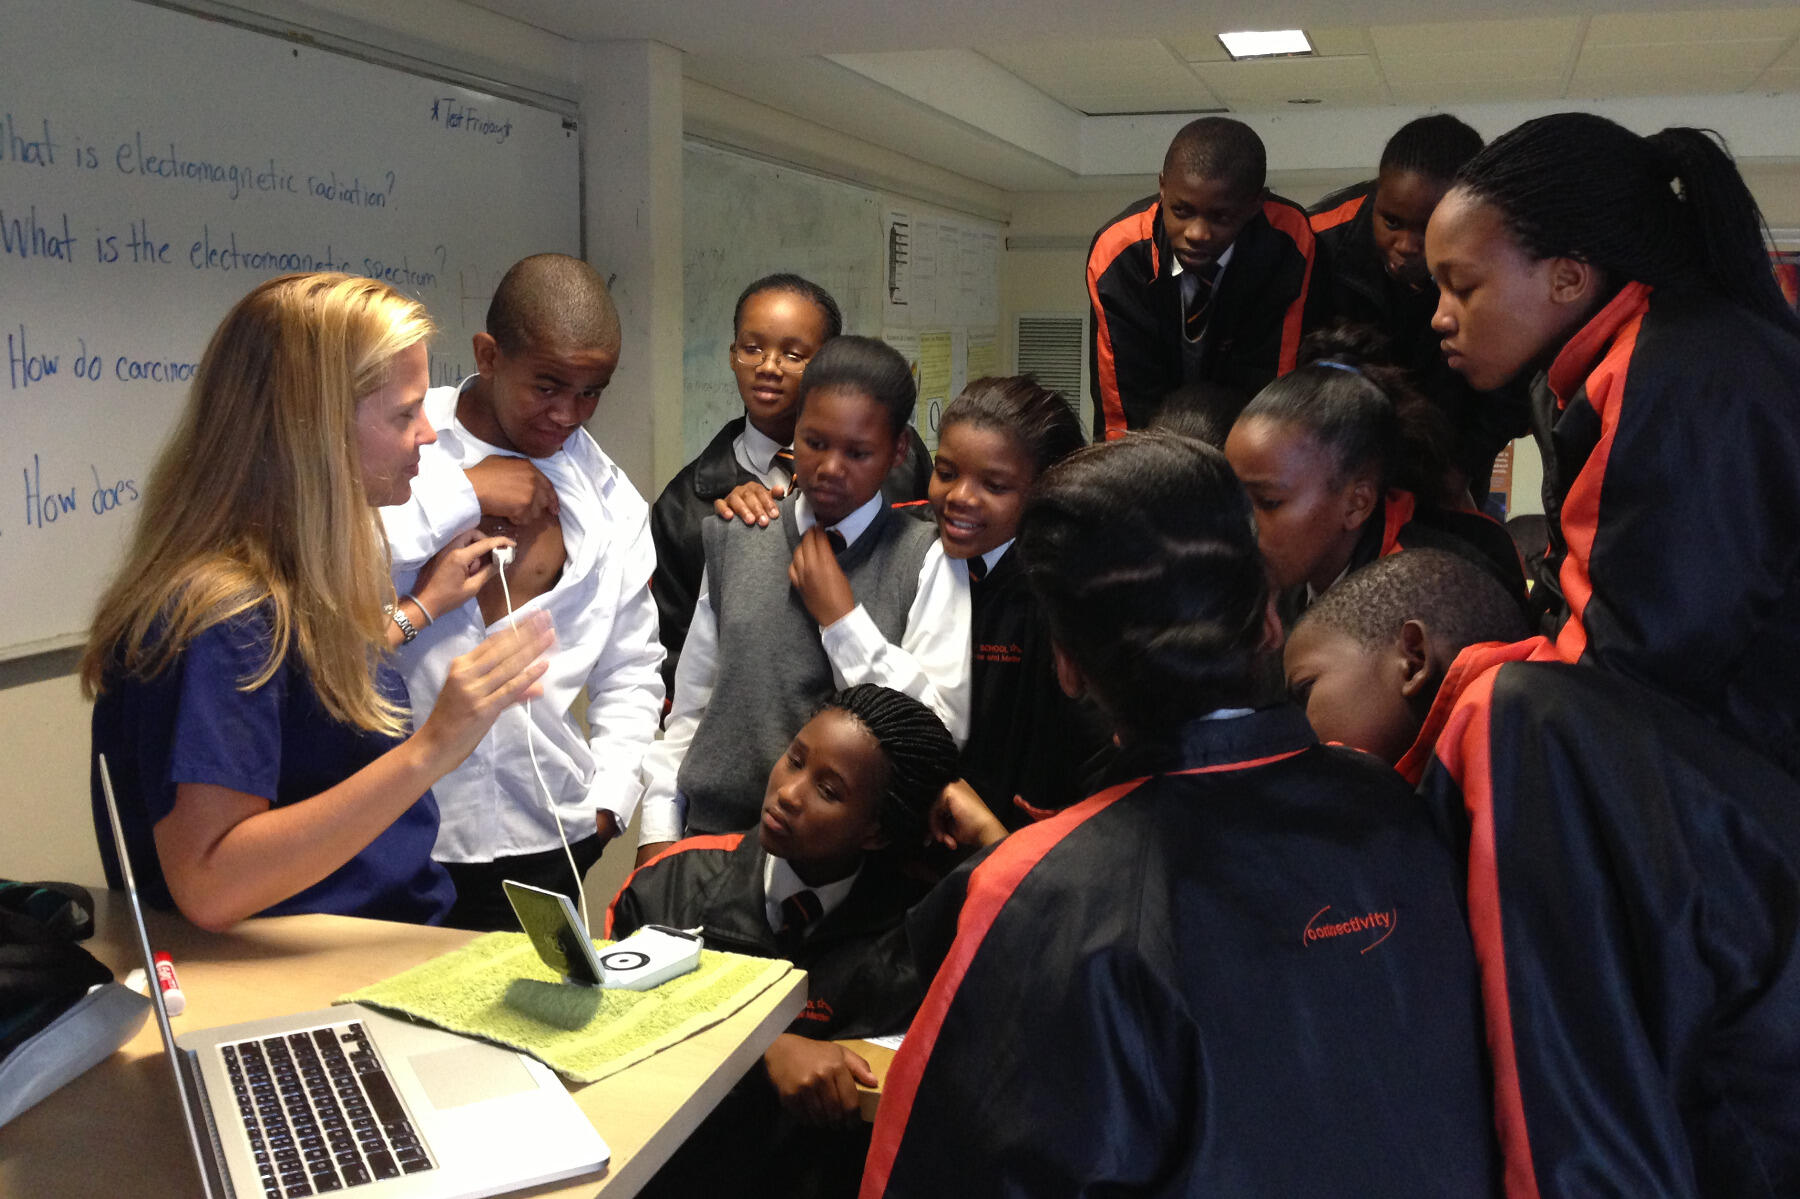 While in Cape Town, South Africa, to teach ultrasound to emergency medicine residents, Diegelmann also had the opportunity to teach local schoolchildren about medical technology.